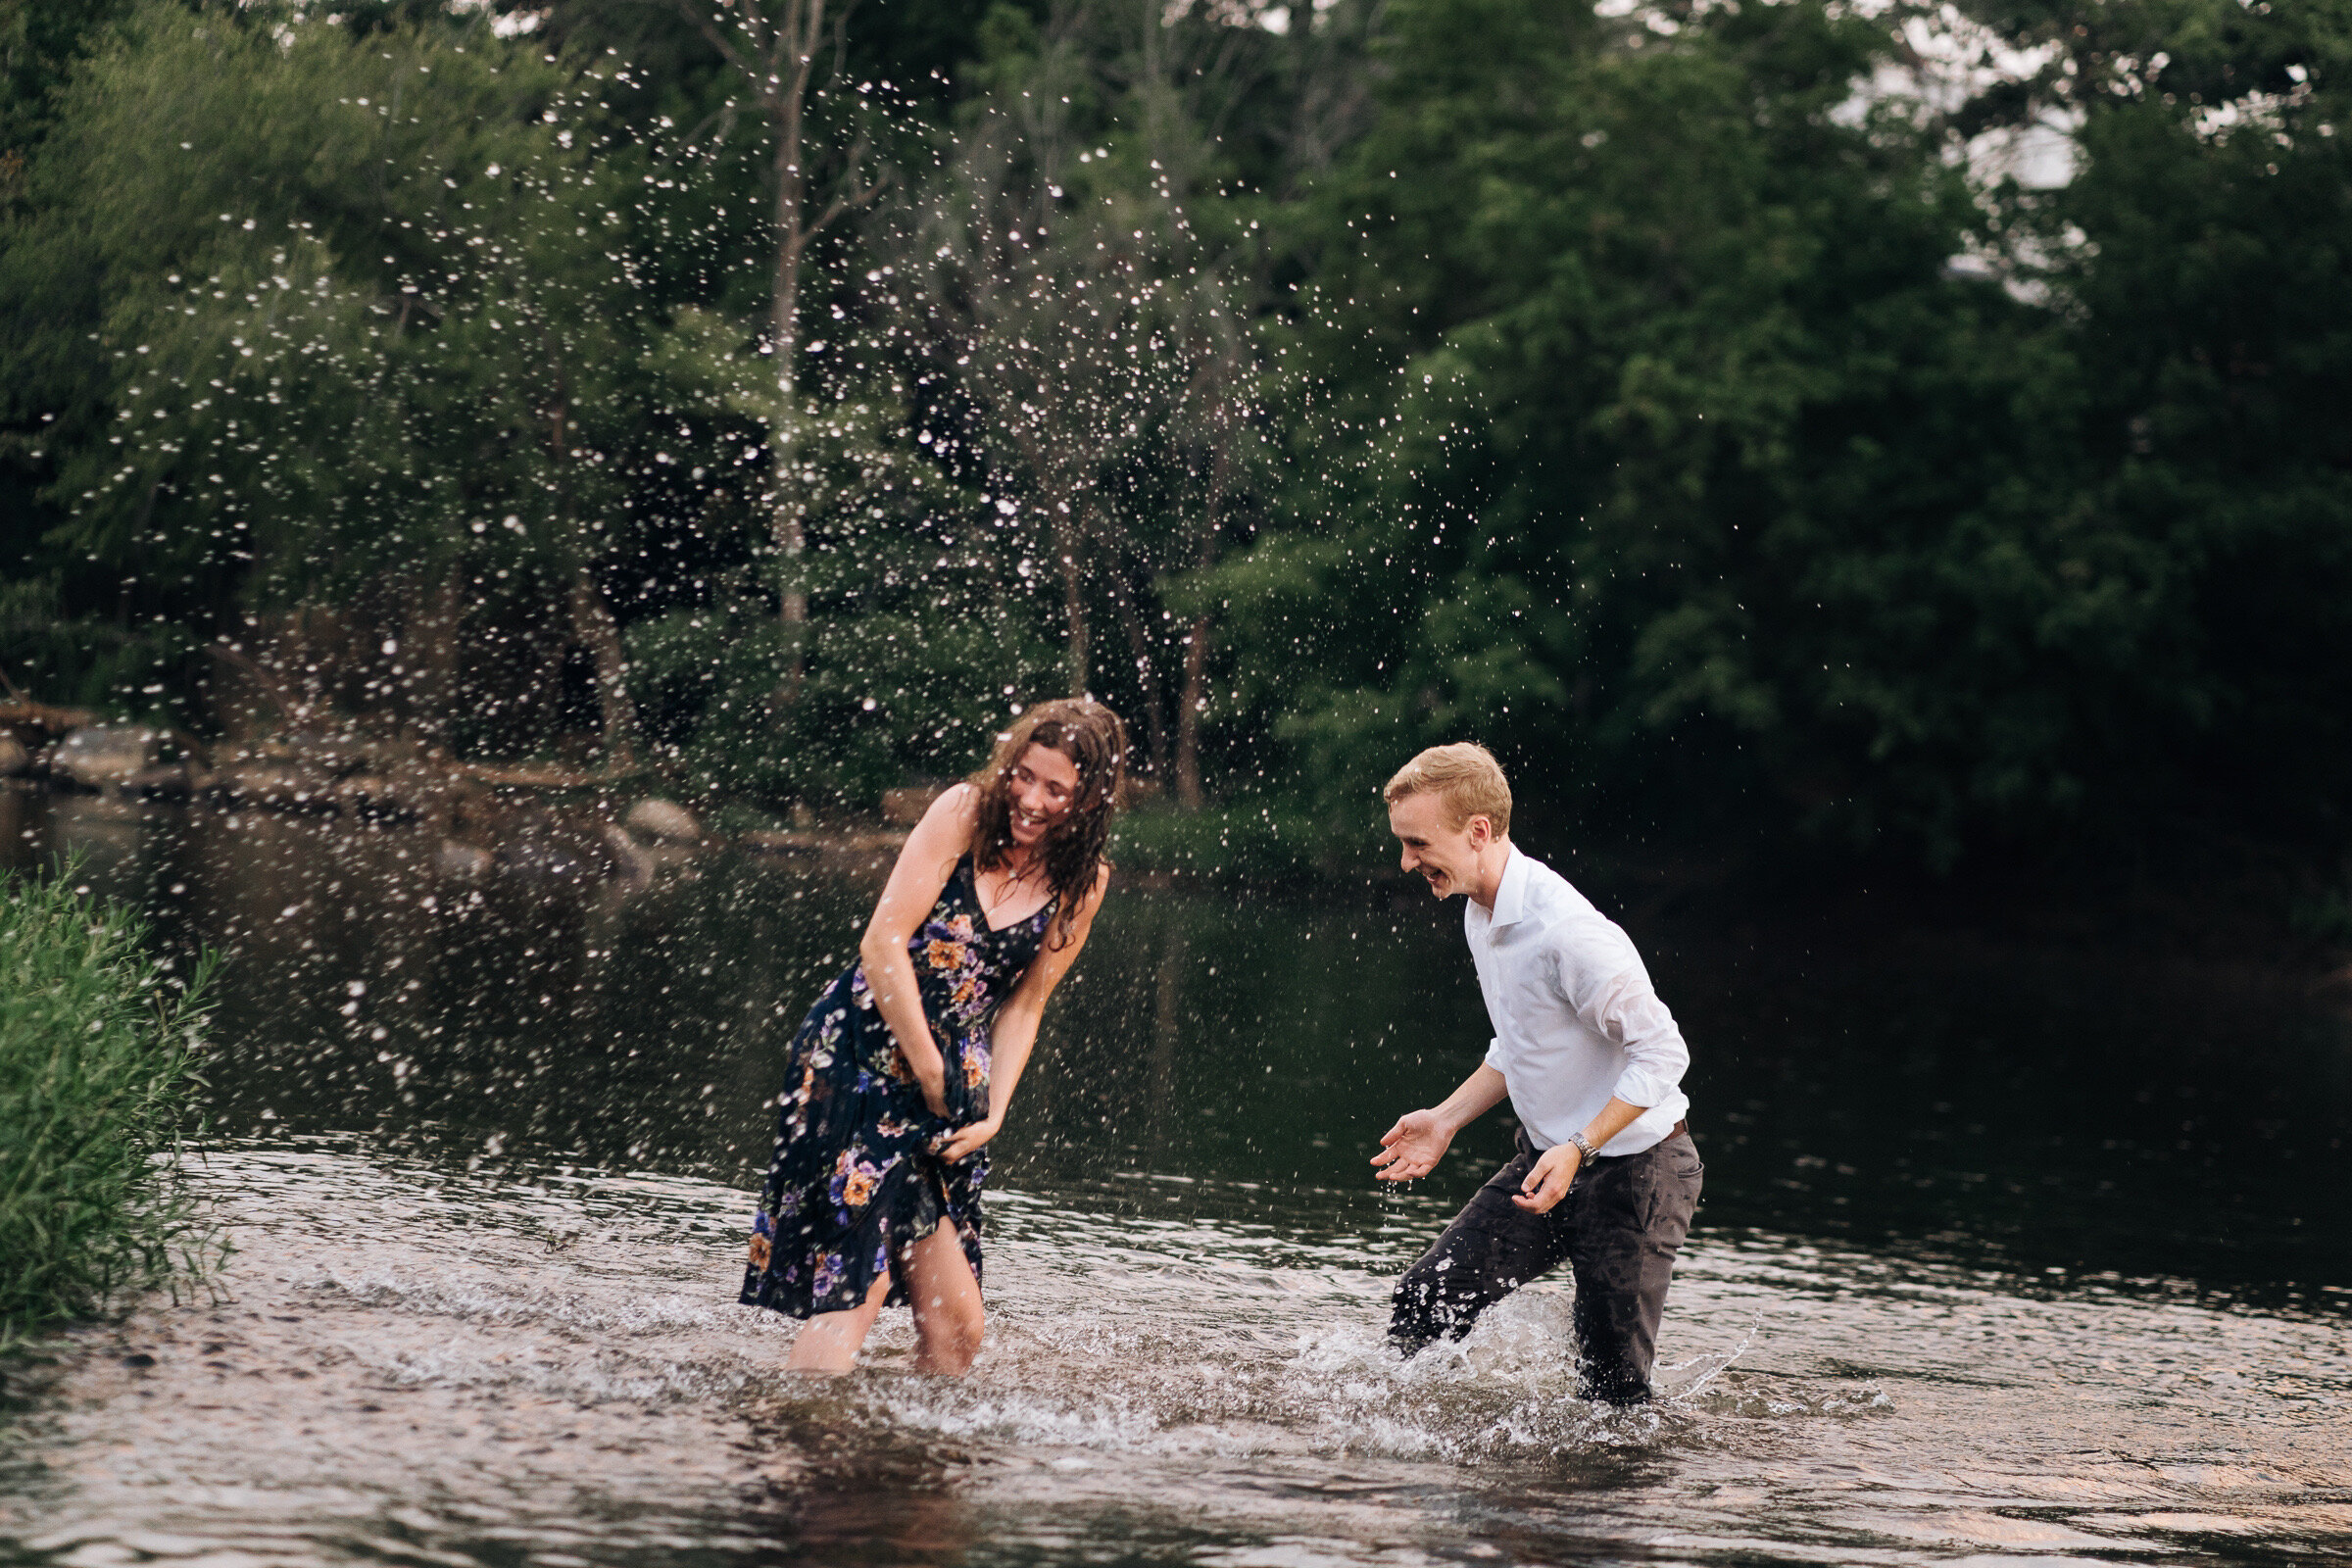 grant-rachel-downtown-lynchburg-virginia-summer-lifestyle-in-the-river-romantic-flirty-and-fun-engagement-session-by-jonathan-hannah-photography-20.jpg